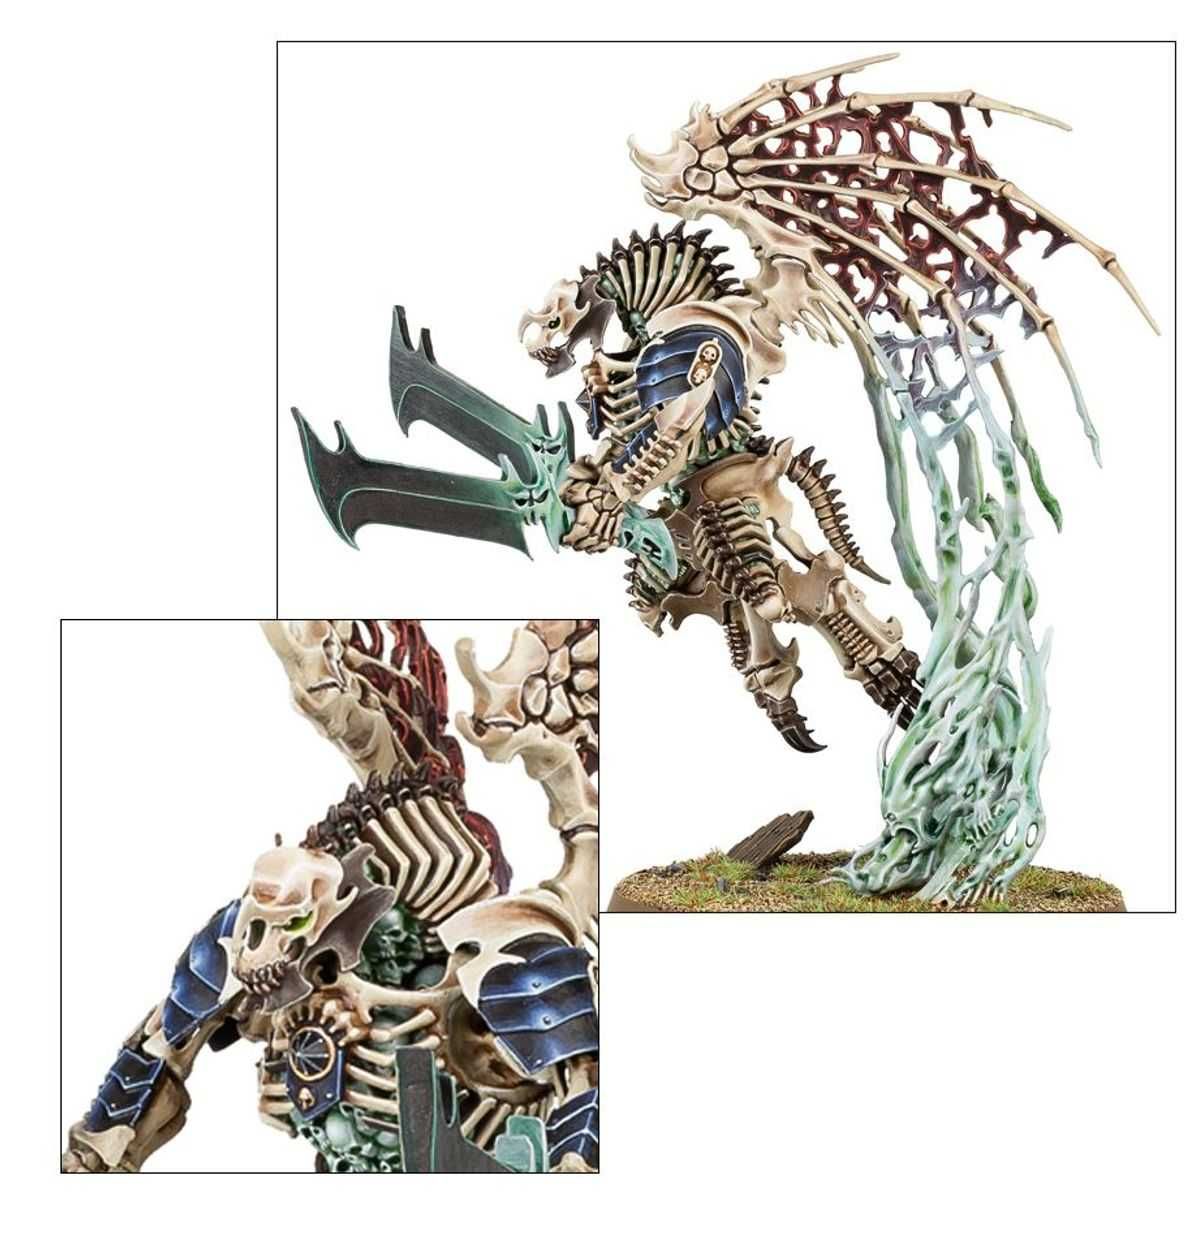 Warhammer Age of Sigmar Ossiarch Bonereapers Morghast Harbingers